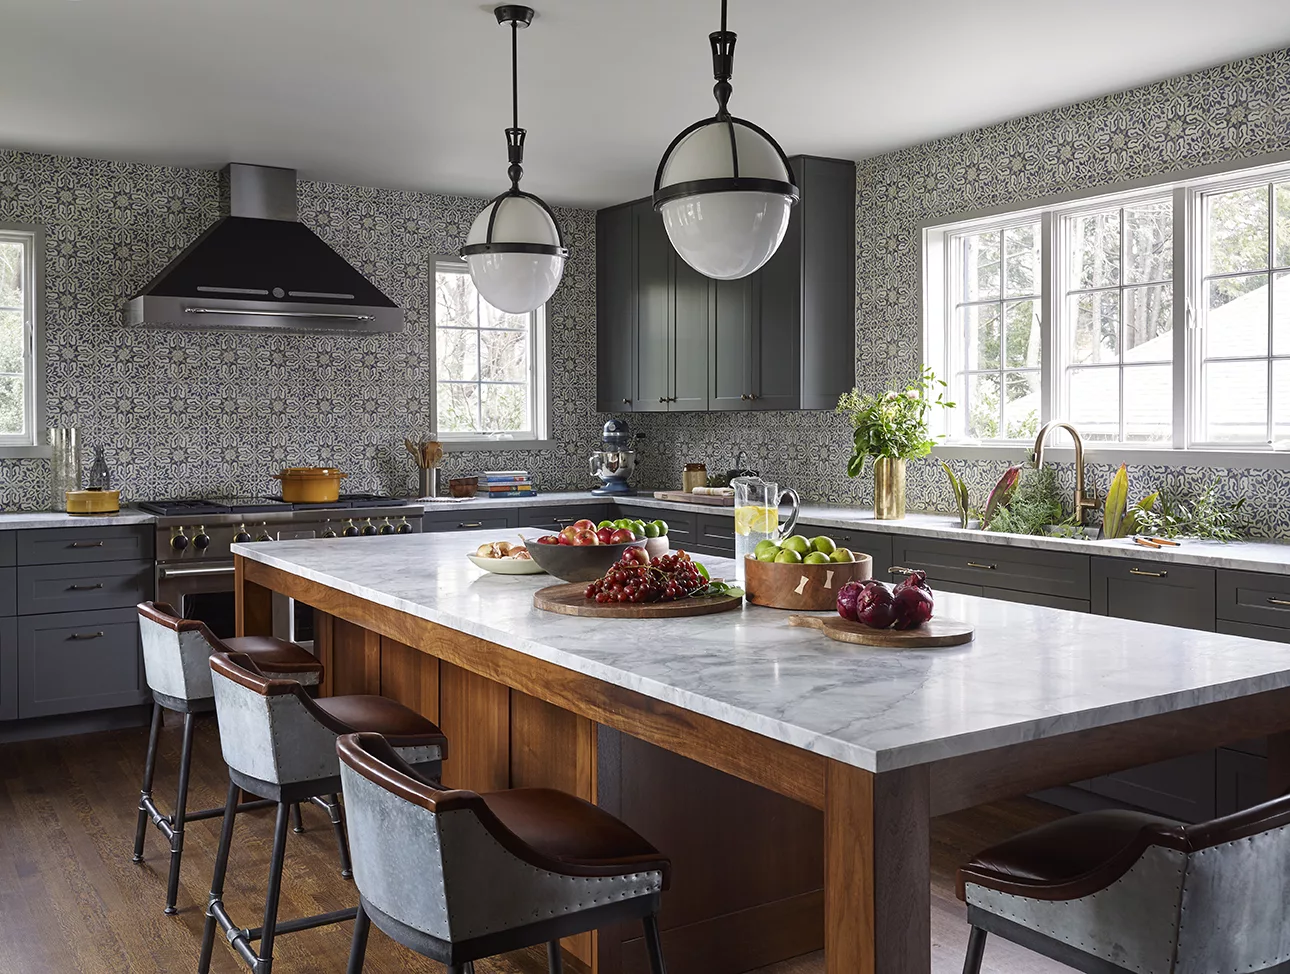 Larchmont House | Kitchen in Grey and White Tones With A Big Dining Table In the Middle Filled with Fruits